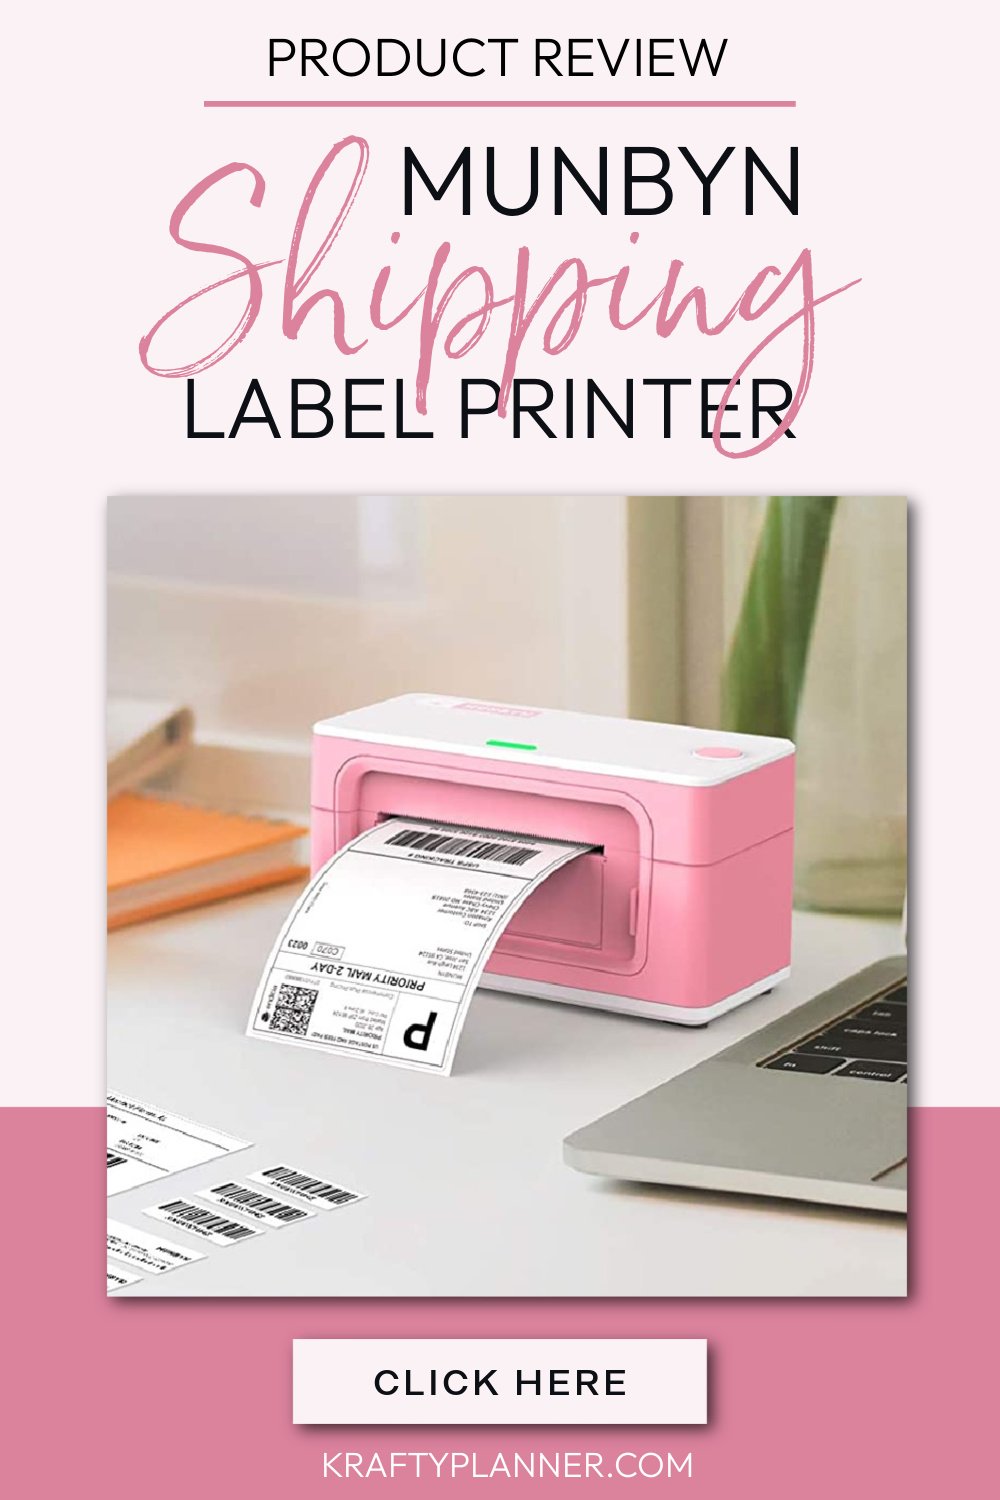 Munbyn Thermal Shipping Label Printer Review